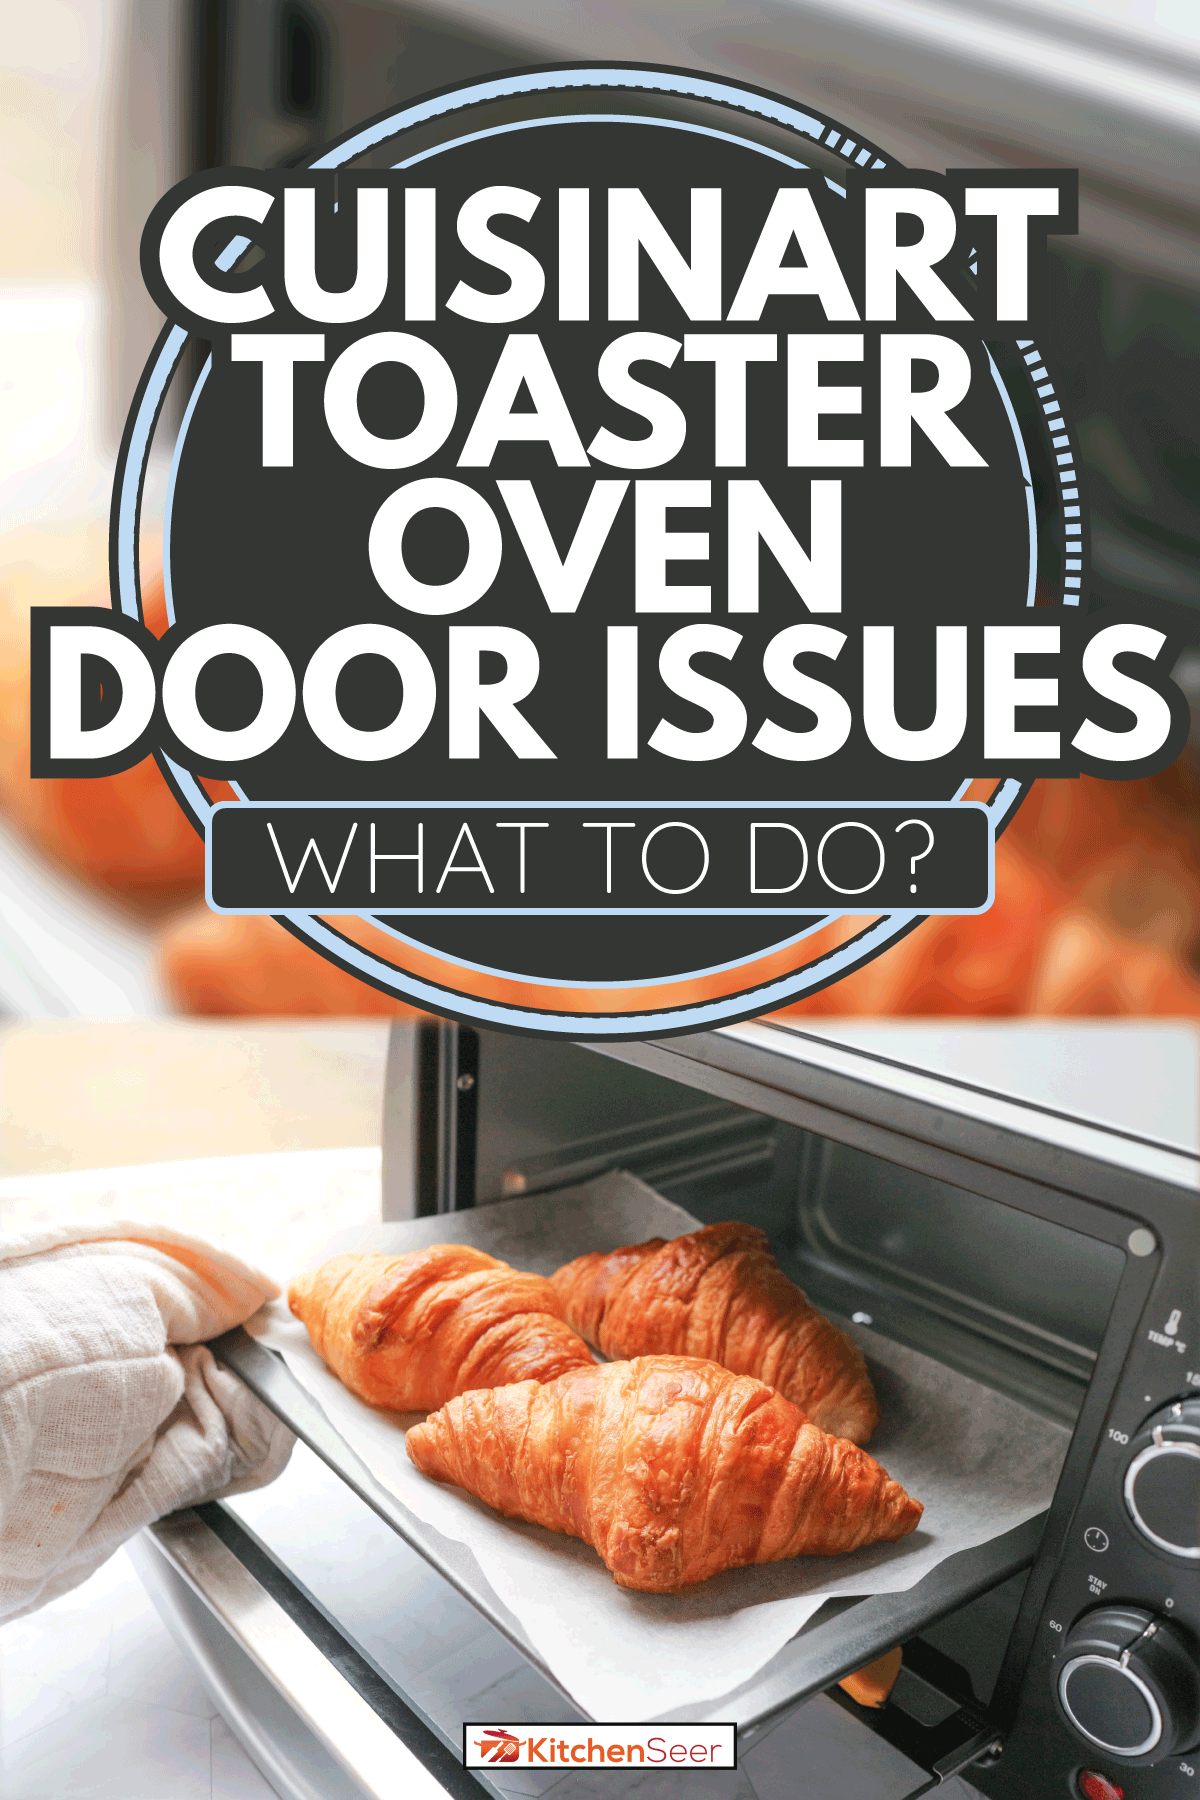 homemade croissant and home use mini oven. Cuisinart Toaster Oven Door Issues—What To Do